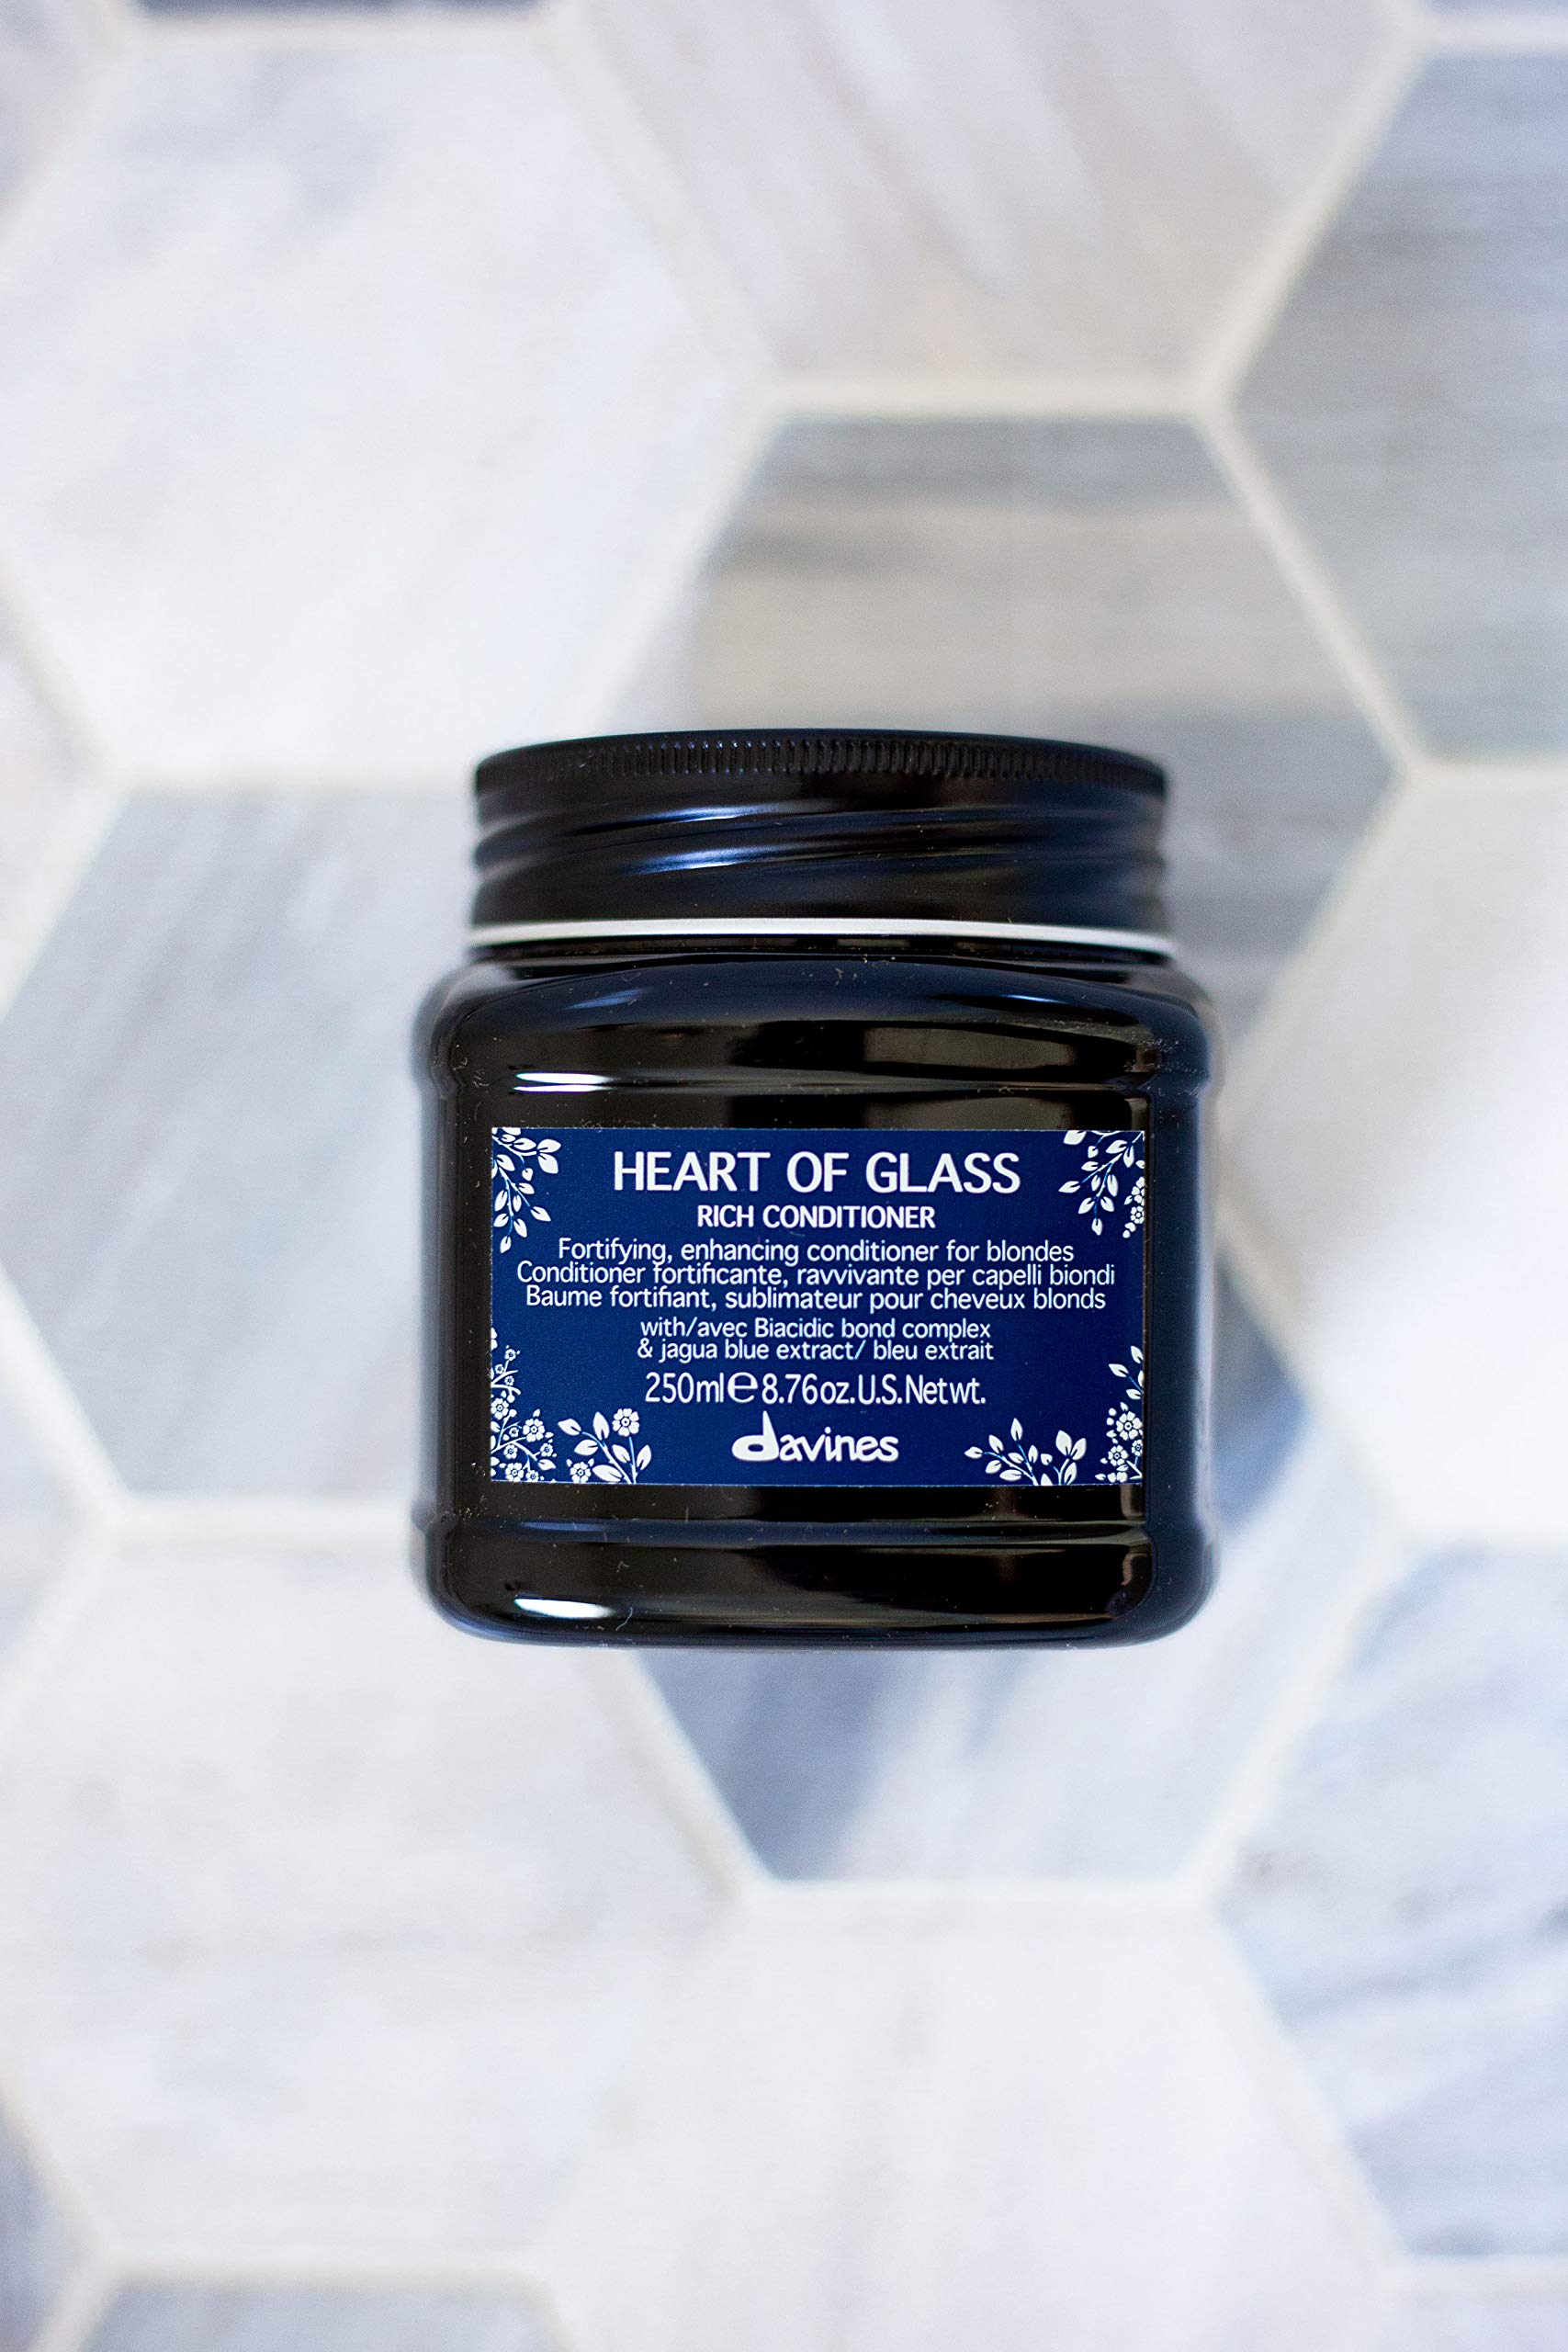 Davines Heart Of Glass Rich Conditioner For Blonde Care, Intense Nourishment And Fortifying Action For Natural And Cosmetically Treated Hair